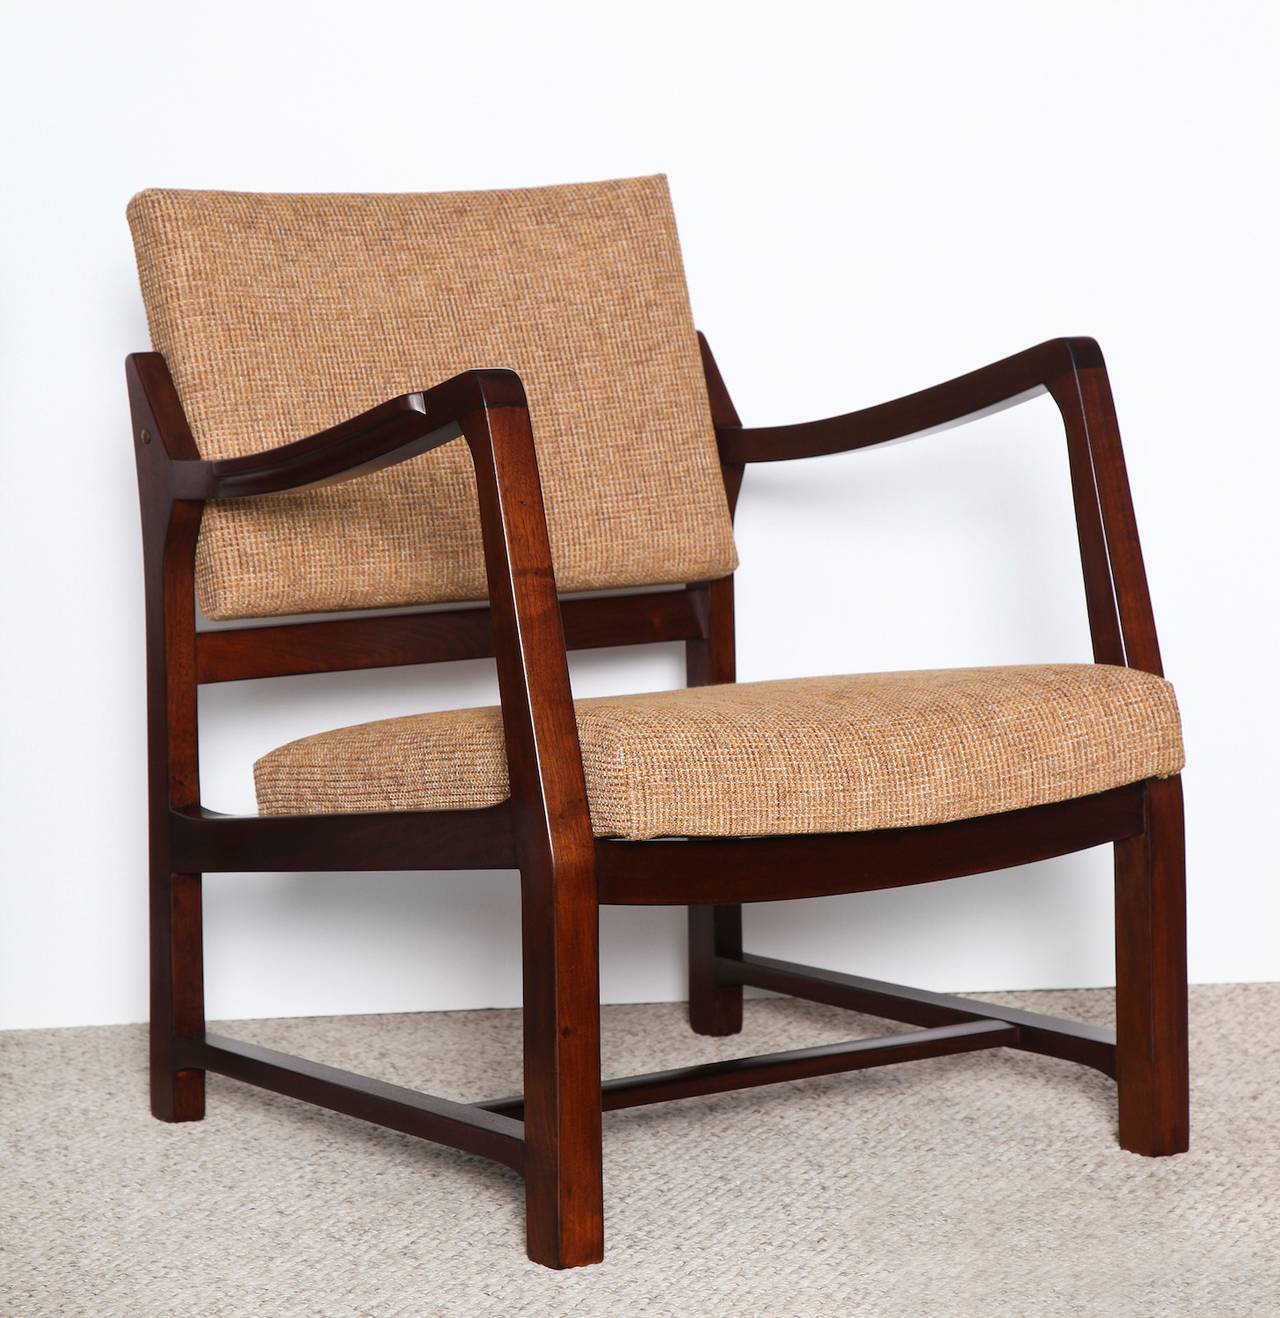 Rare pair of open armchairs by Edward Wormley for Dunbar.  Model #4869B, dark-stained walnut frame with upholstered seat and back. Sculptural form, open-arm design with swivel mechanism on backrest.